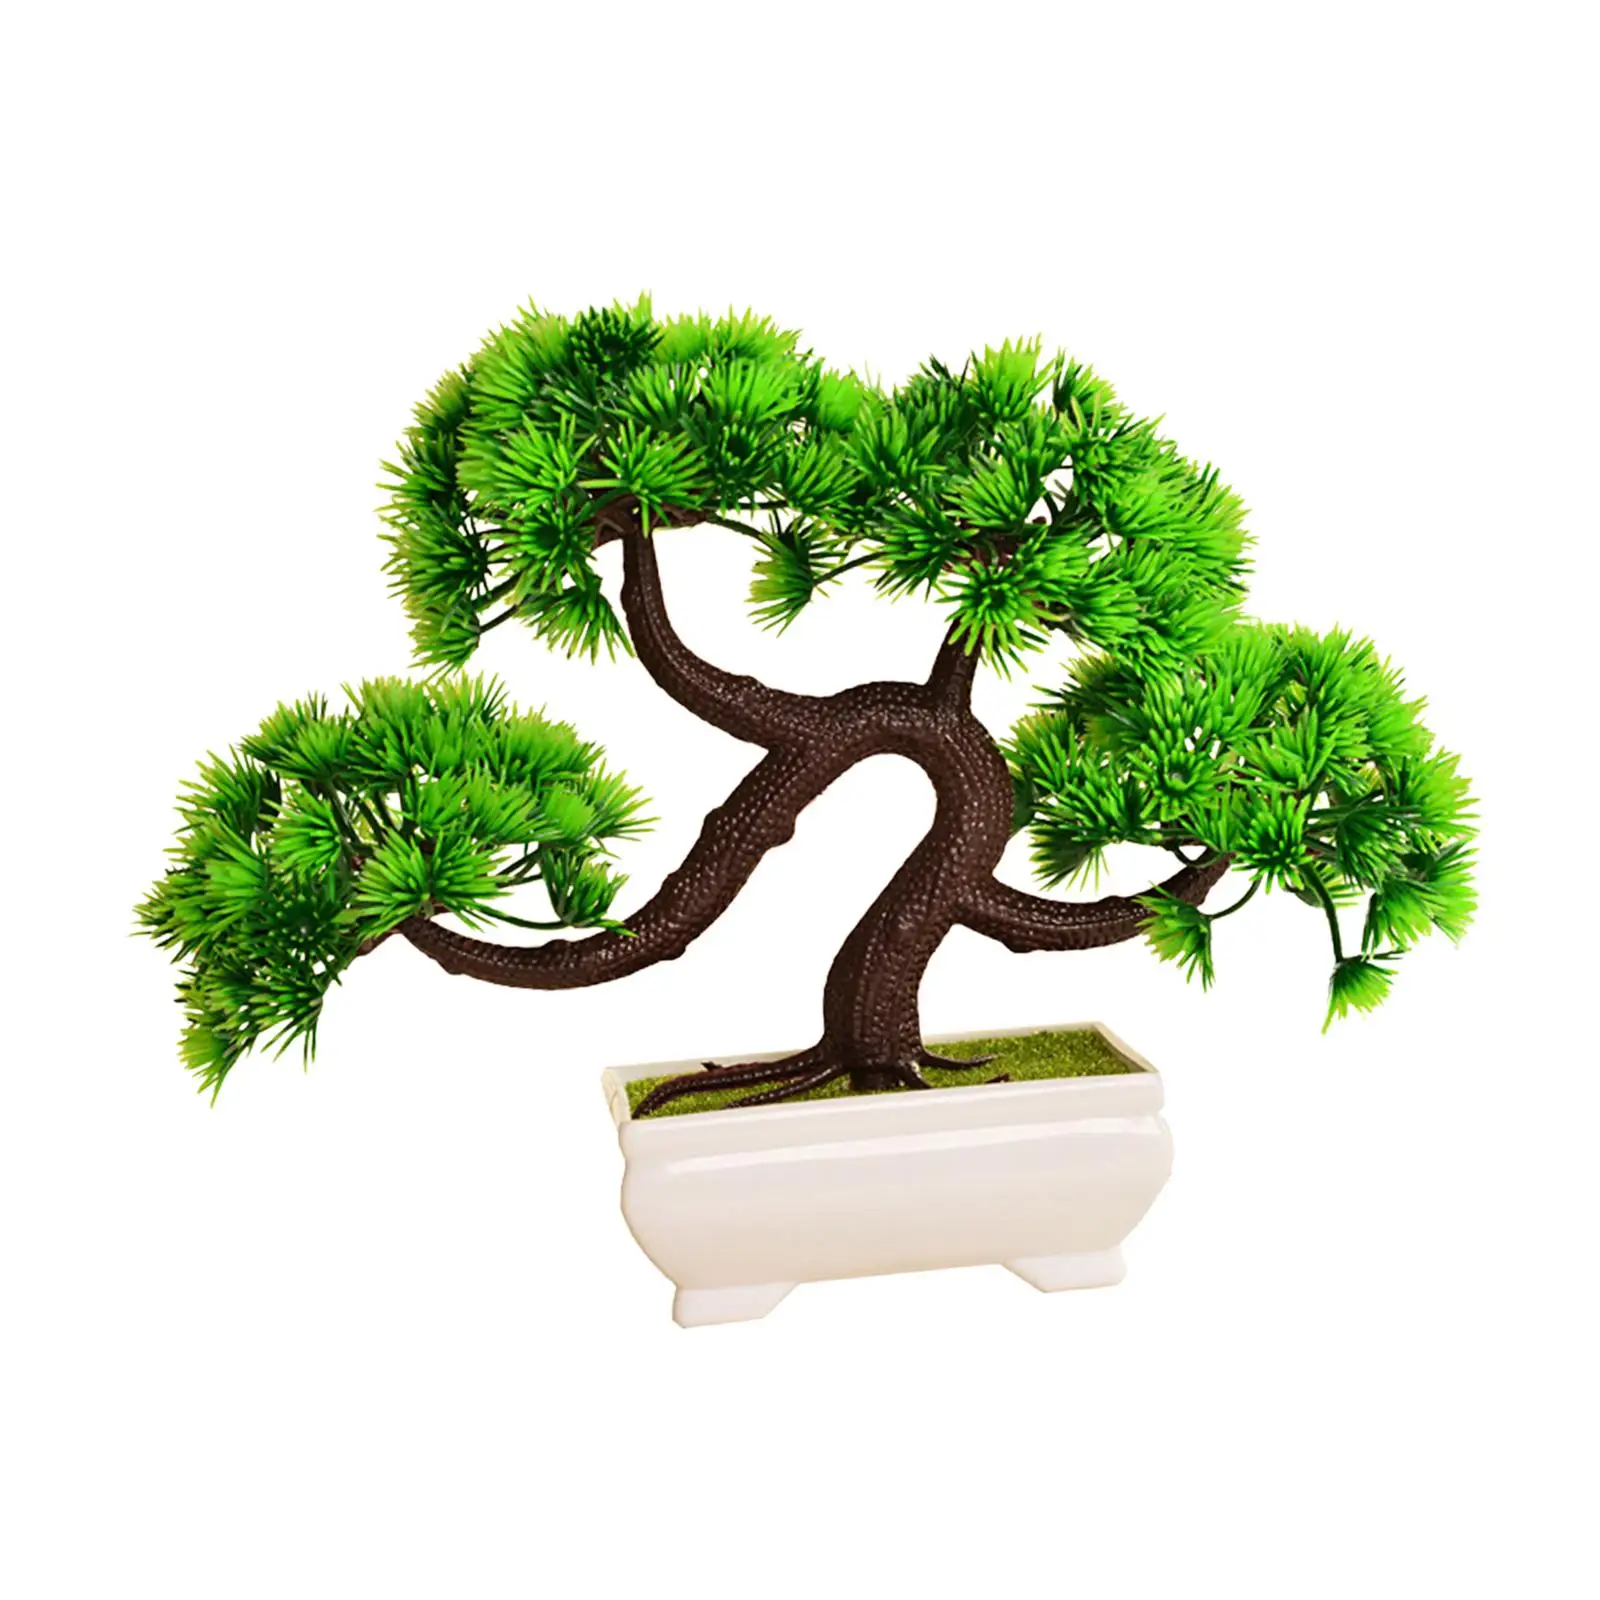 Artificial Bonsai Tree Desk Display Fake Plant Potted Tree Faux Potted Plant for Bedroom Table Living Room Indoor Bookshelf